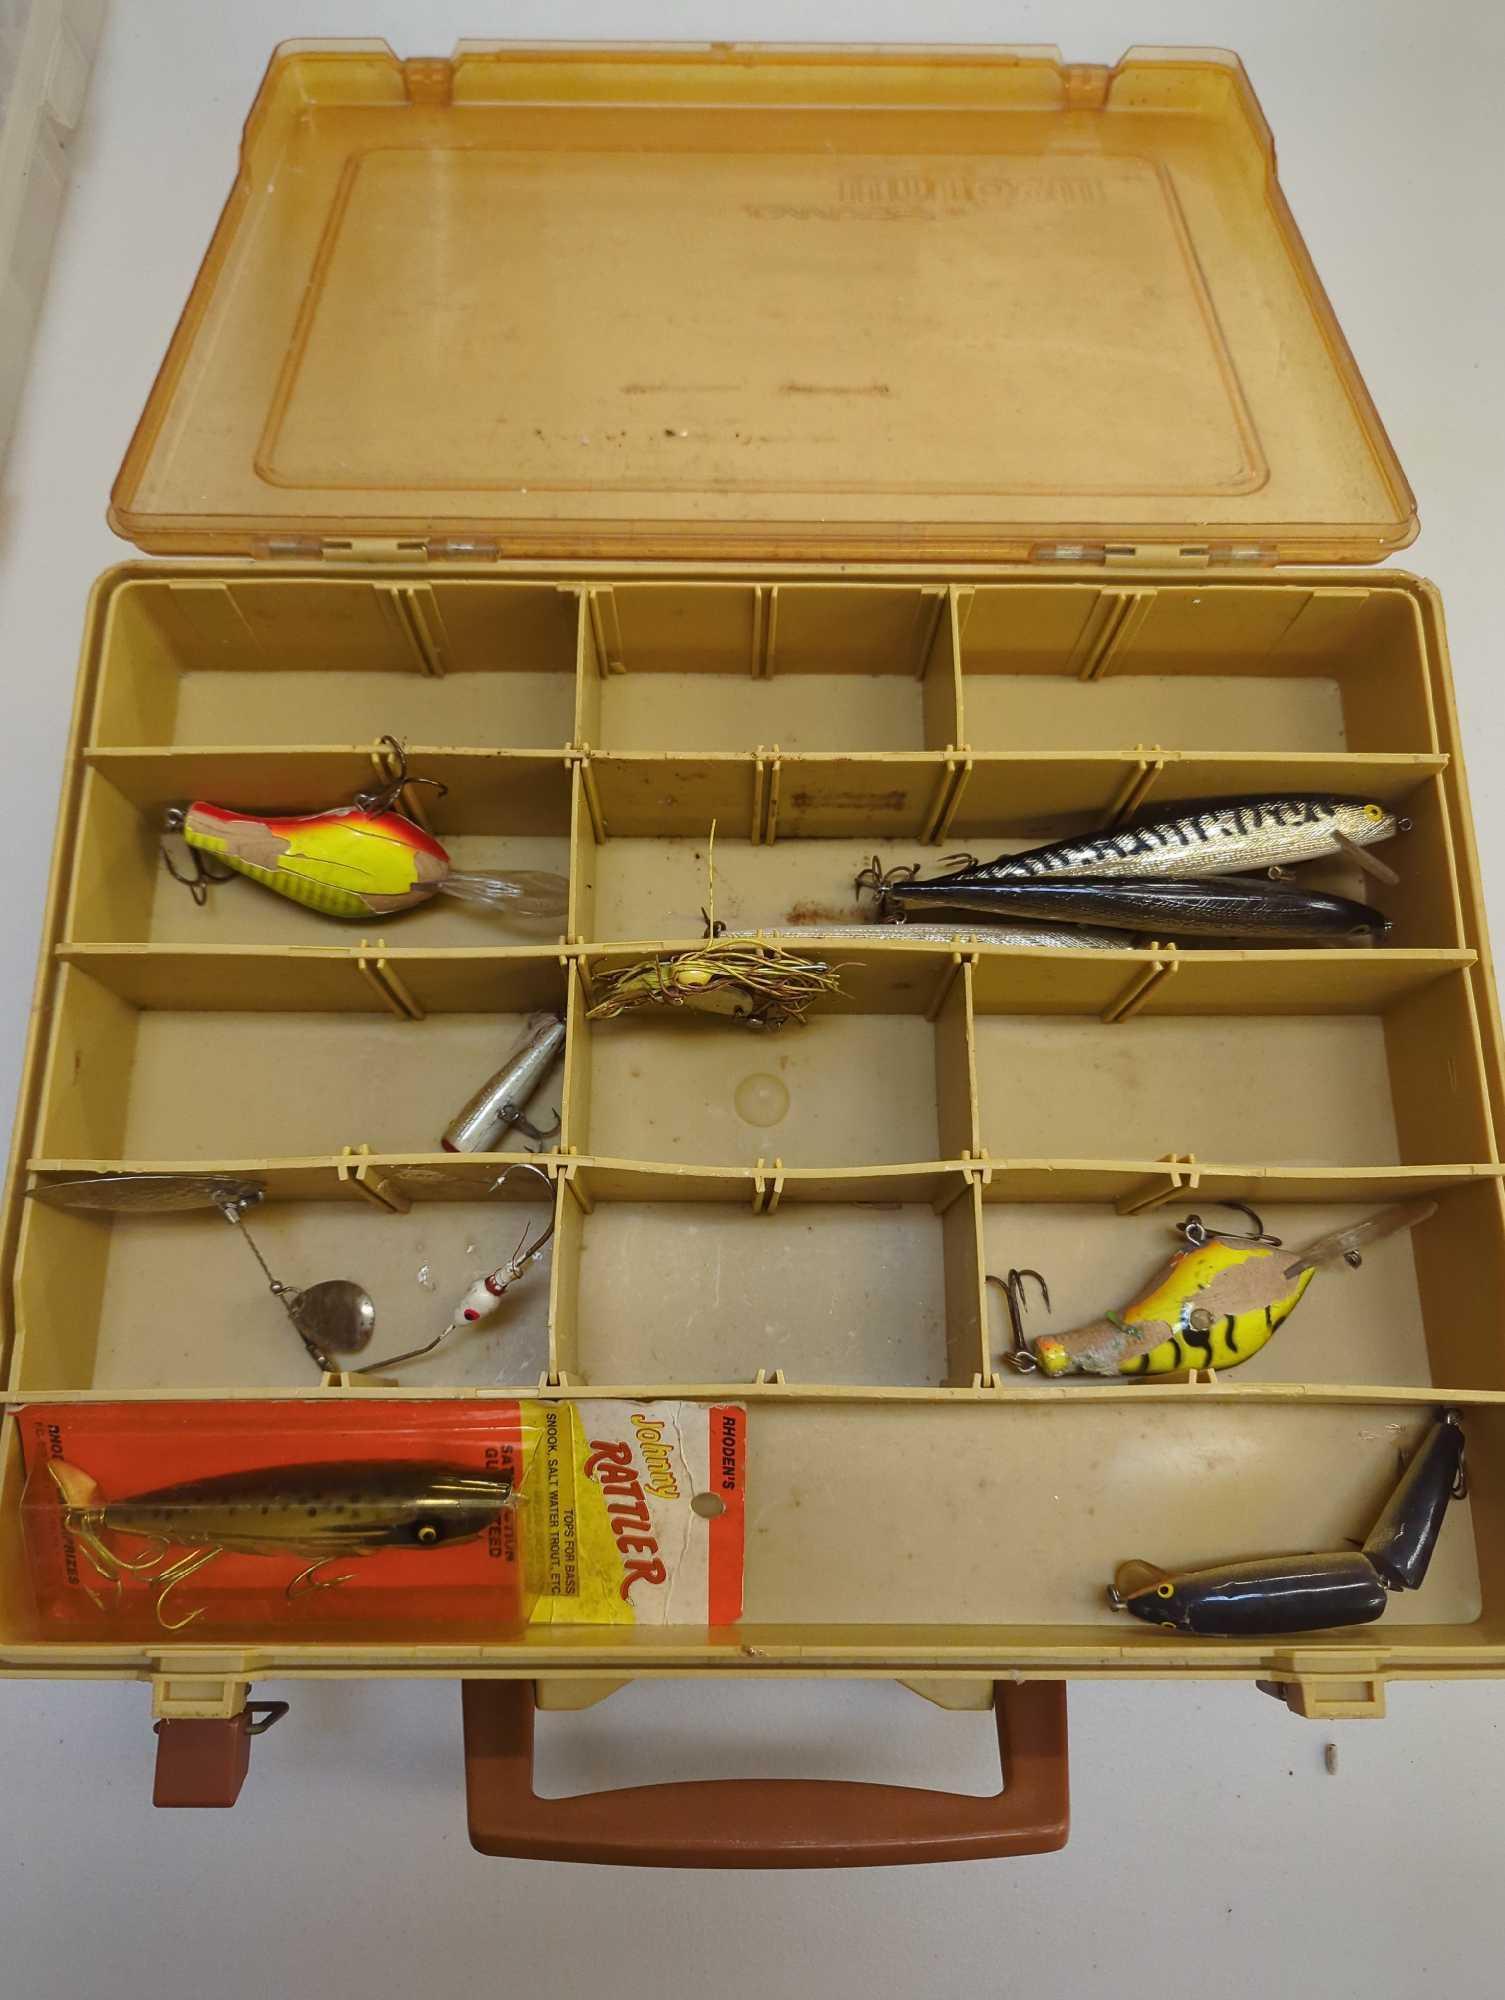 Dual-sided Tackle Box and contents including fishing accessories, various worms, and many other